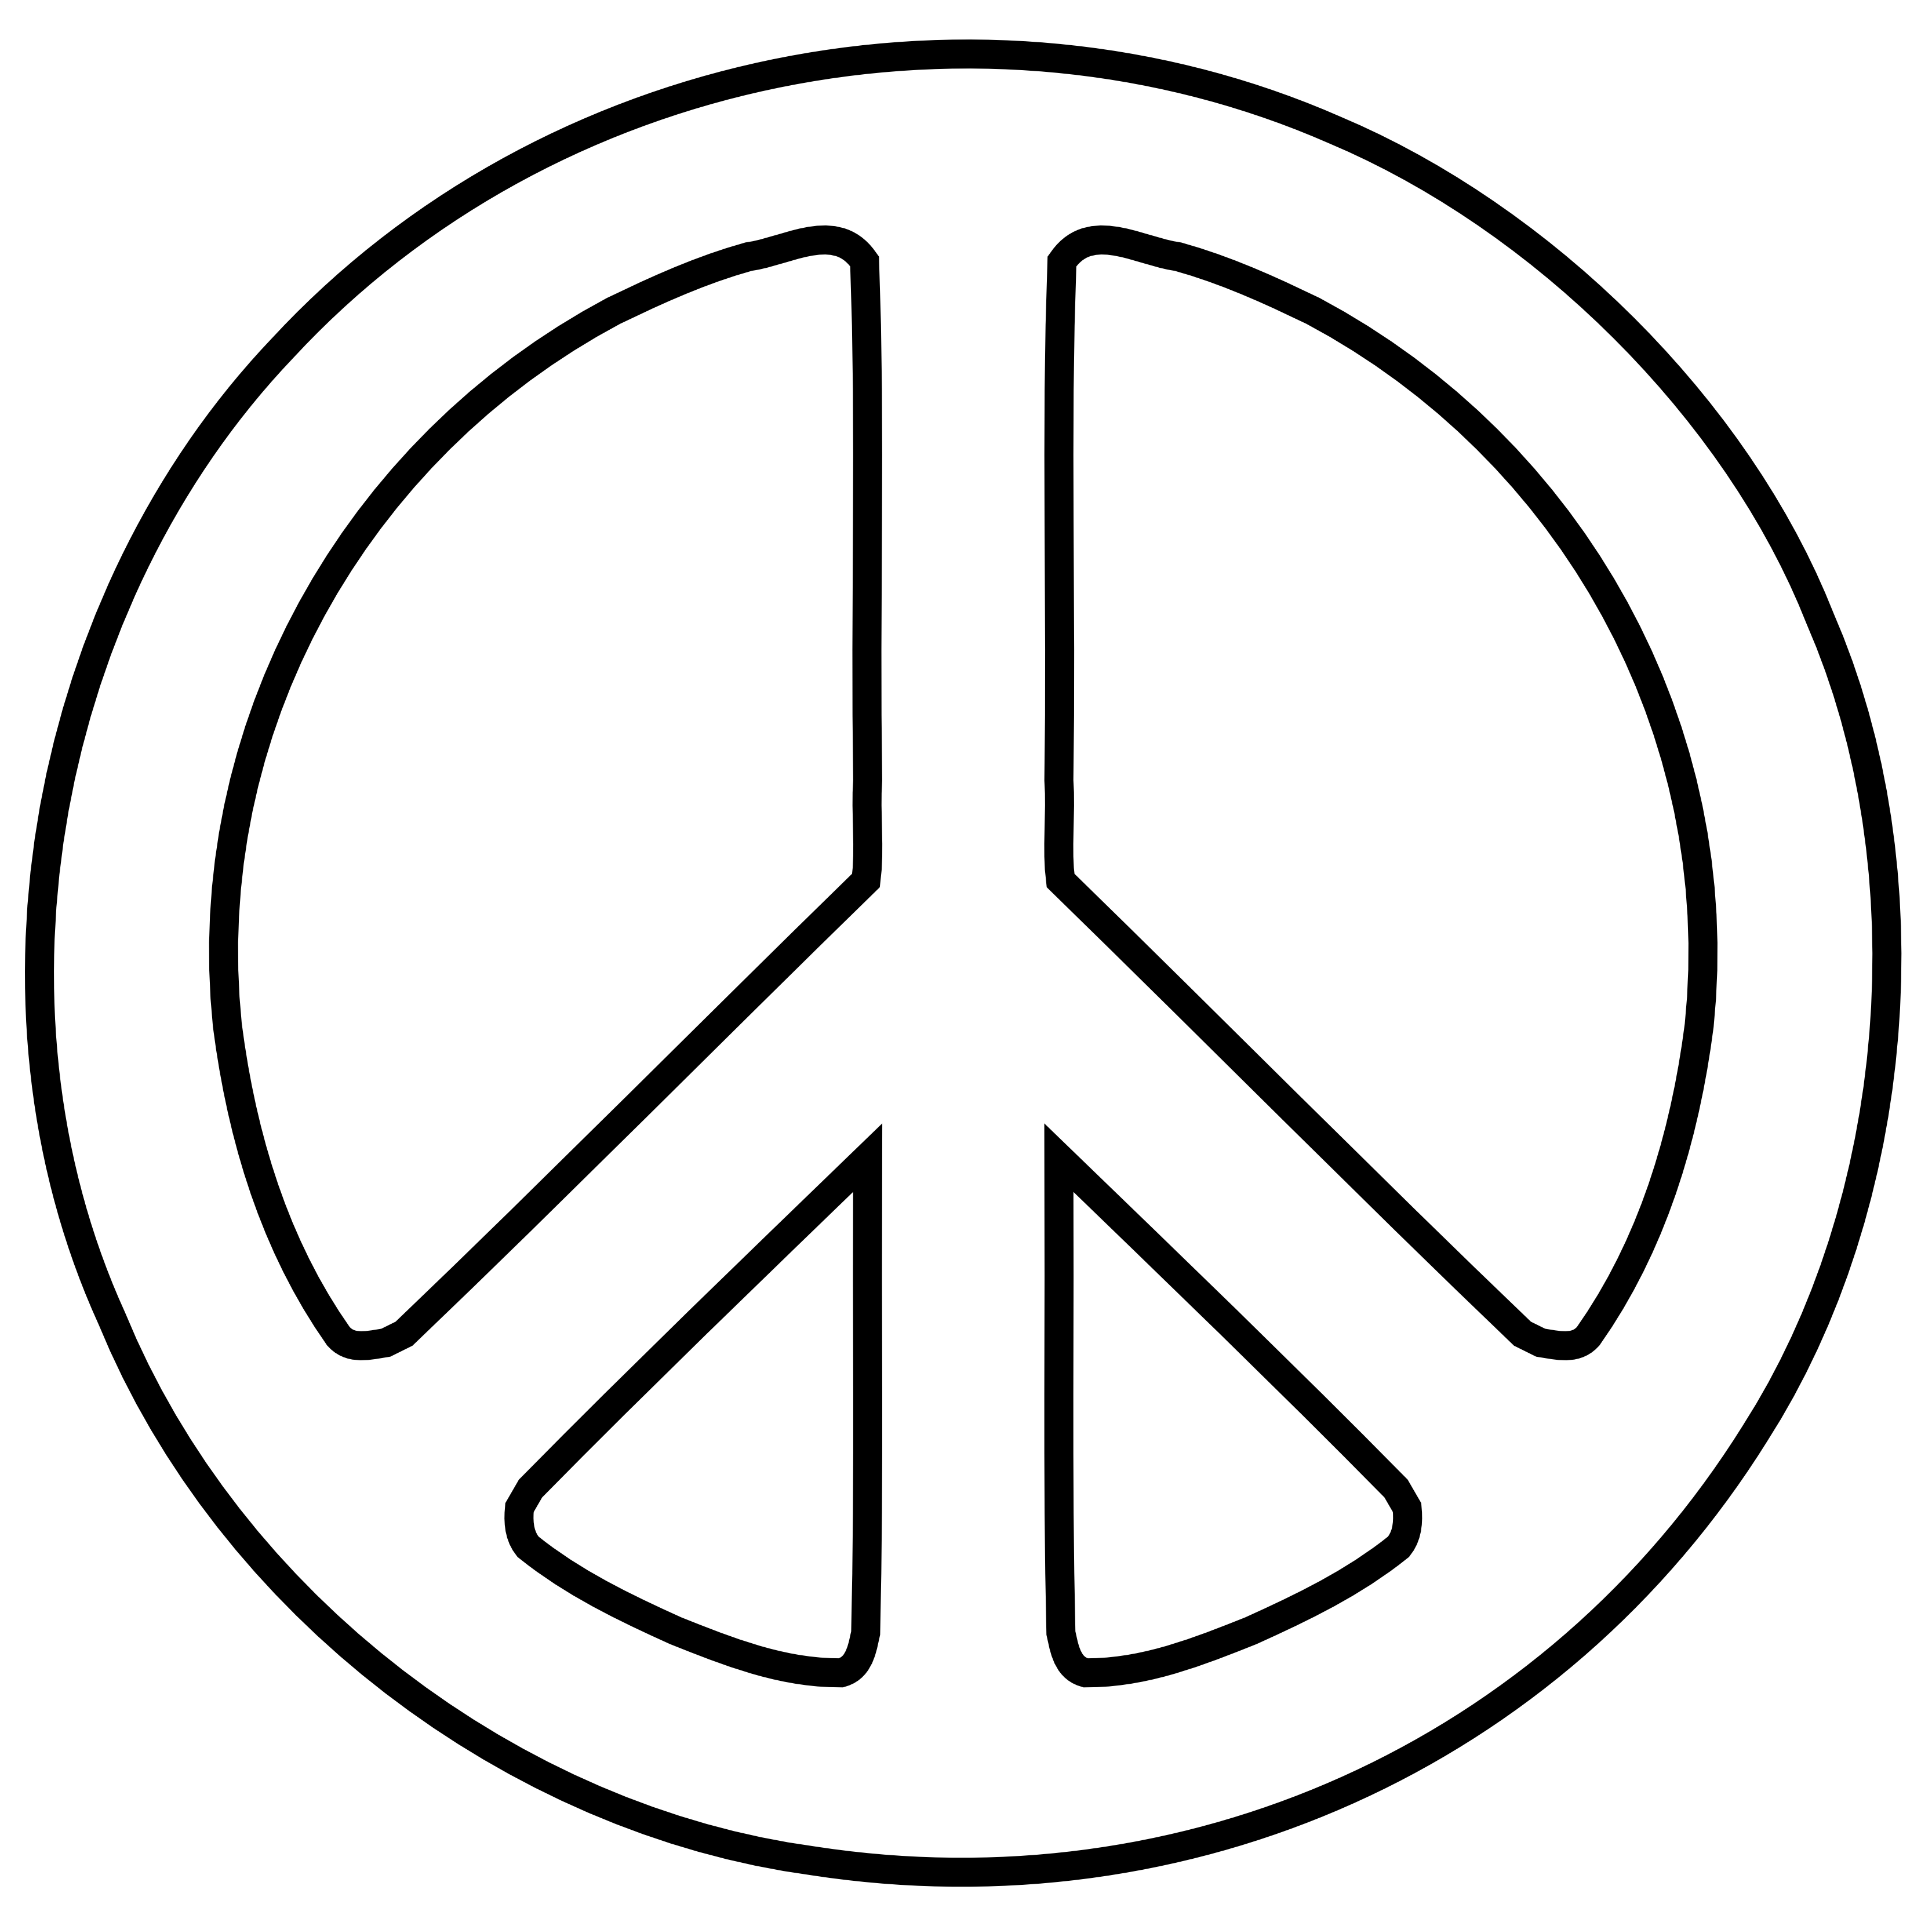 Sign black white line. Words clipart peace